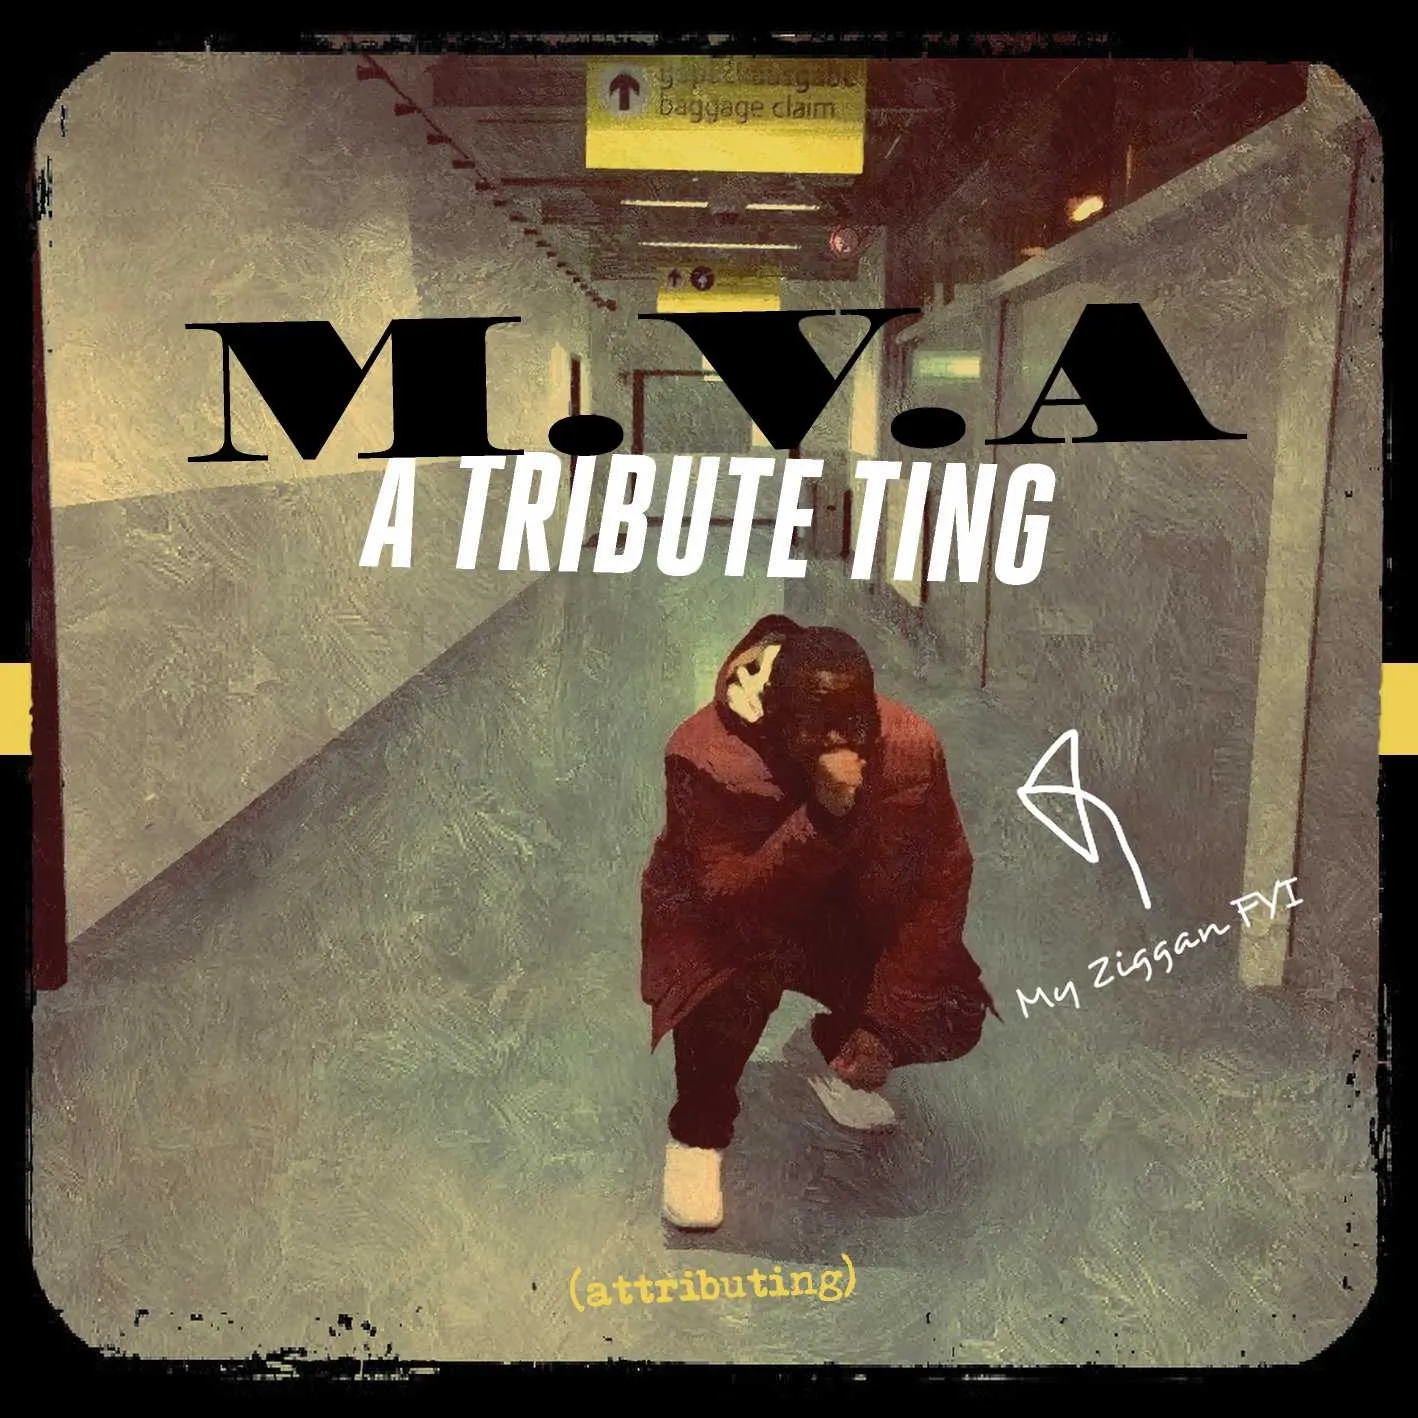 Album cover for “A Tribute Ting” by M.V.A